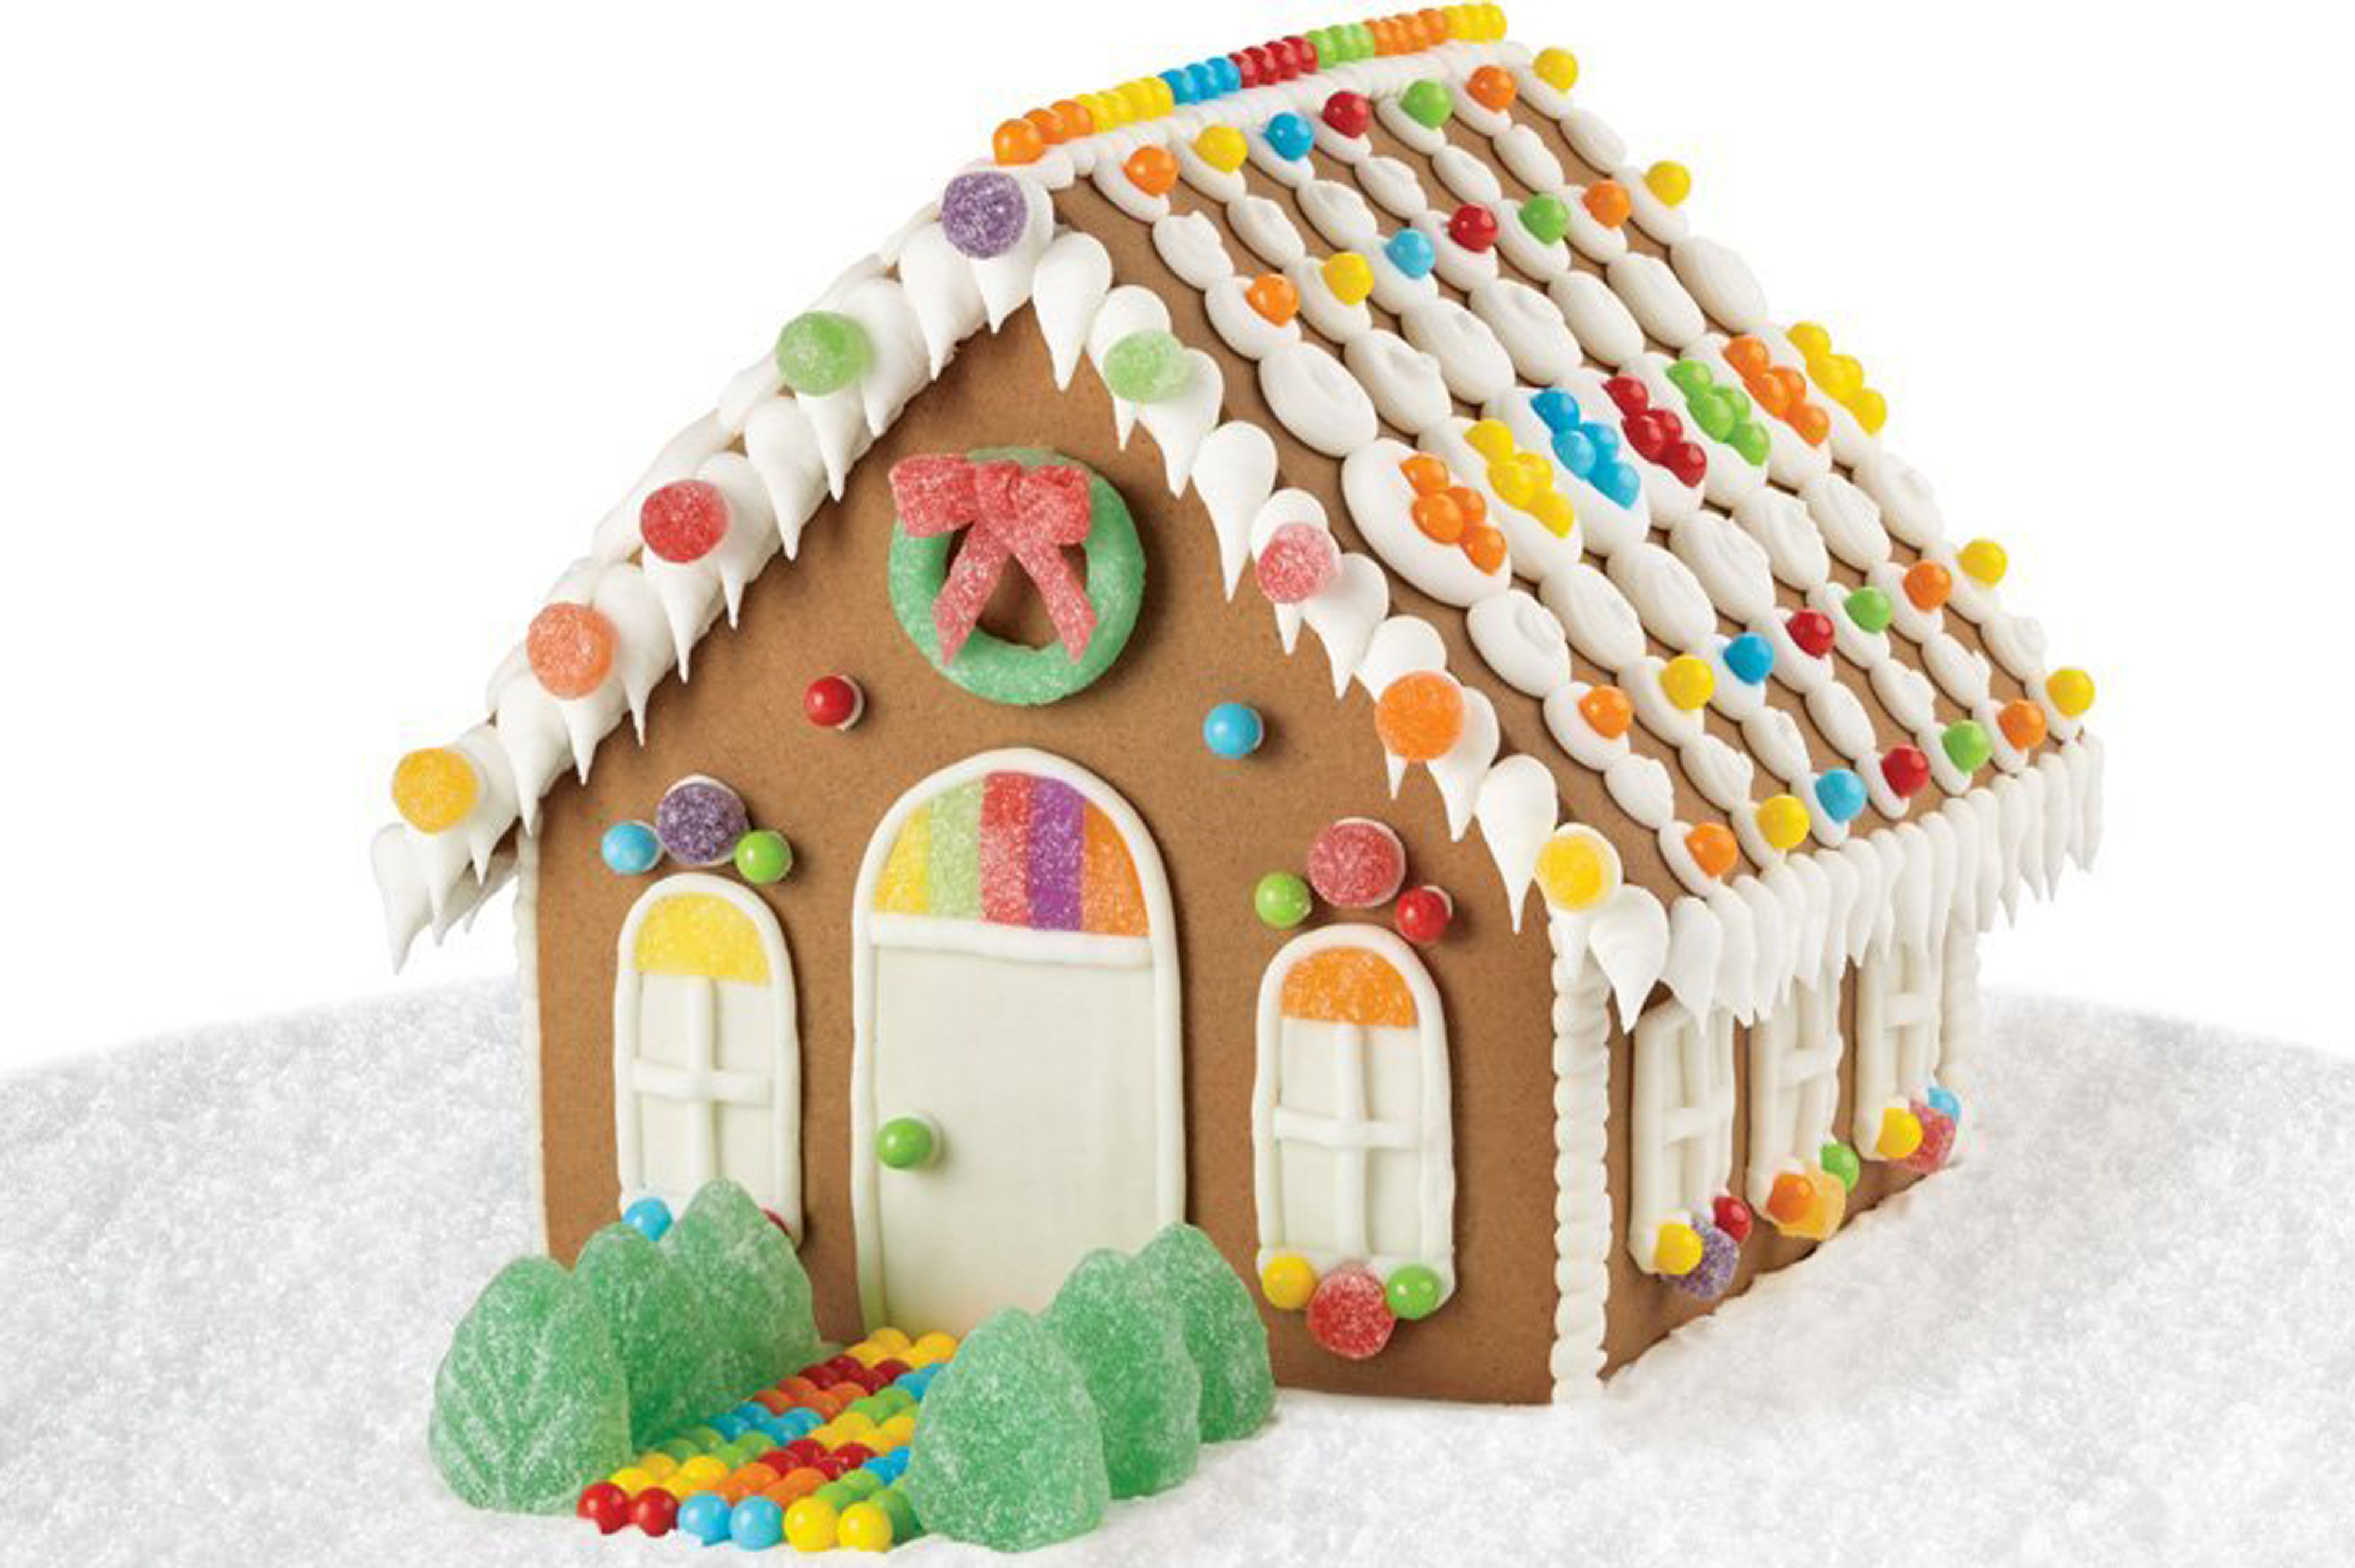 56 Amazing Gingerbread Houses - Pictures of Gingerbread House Design ...